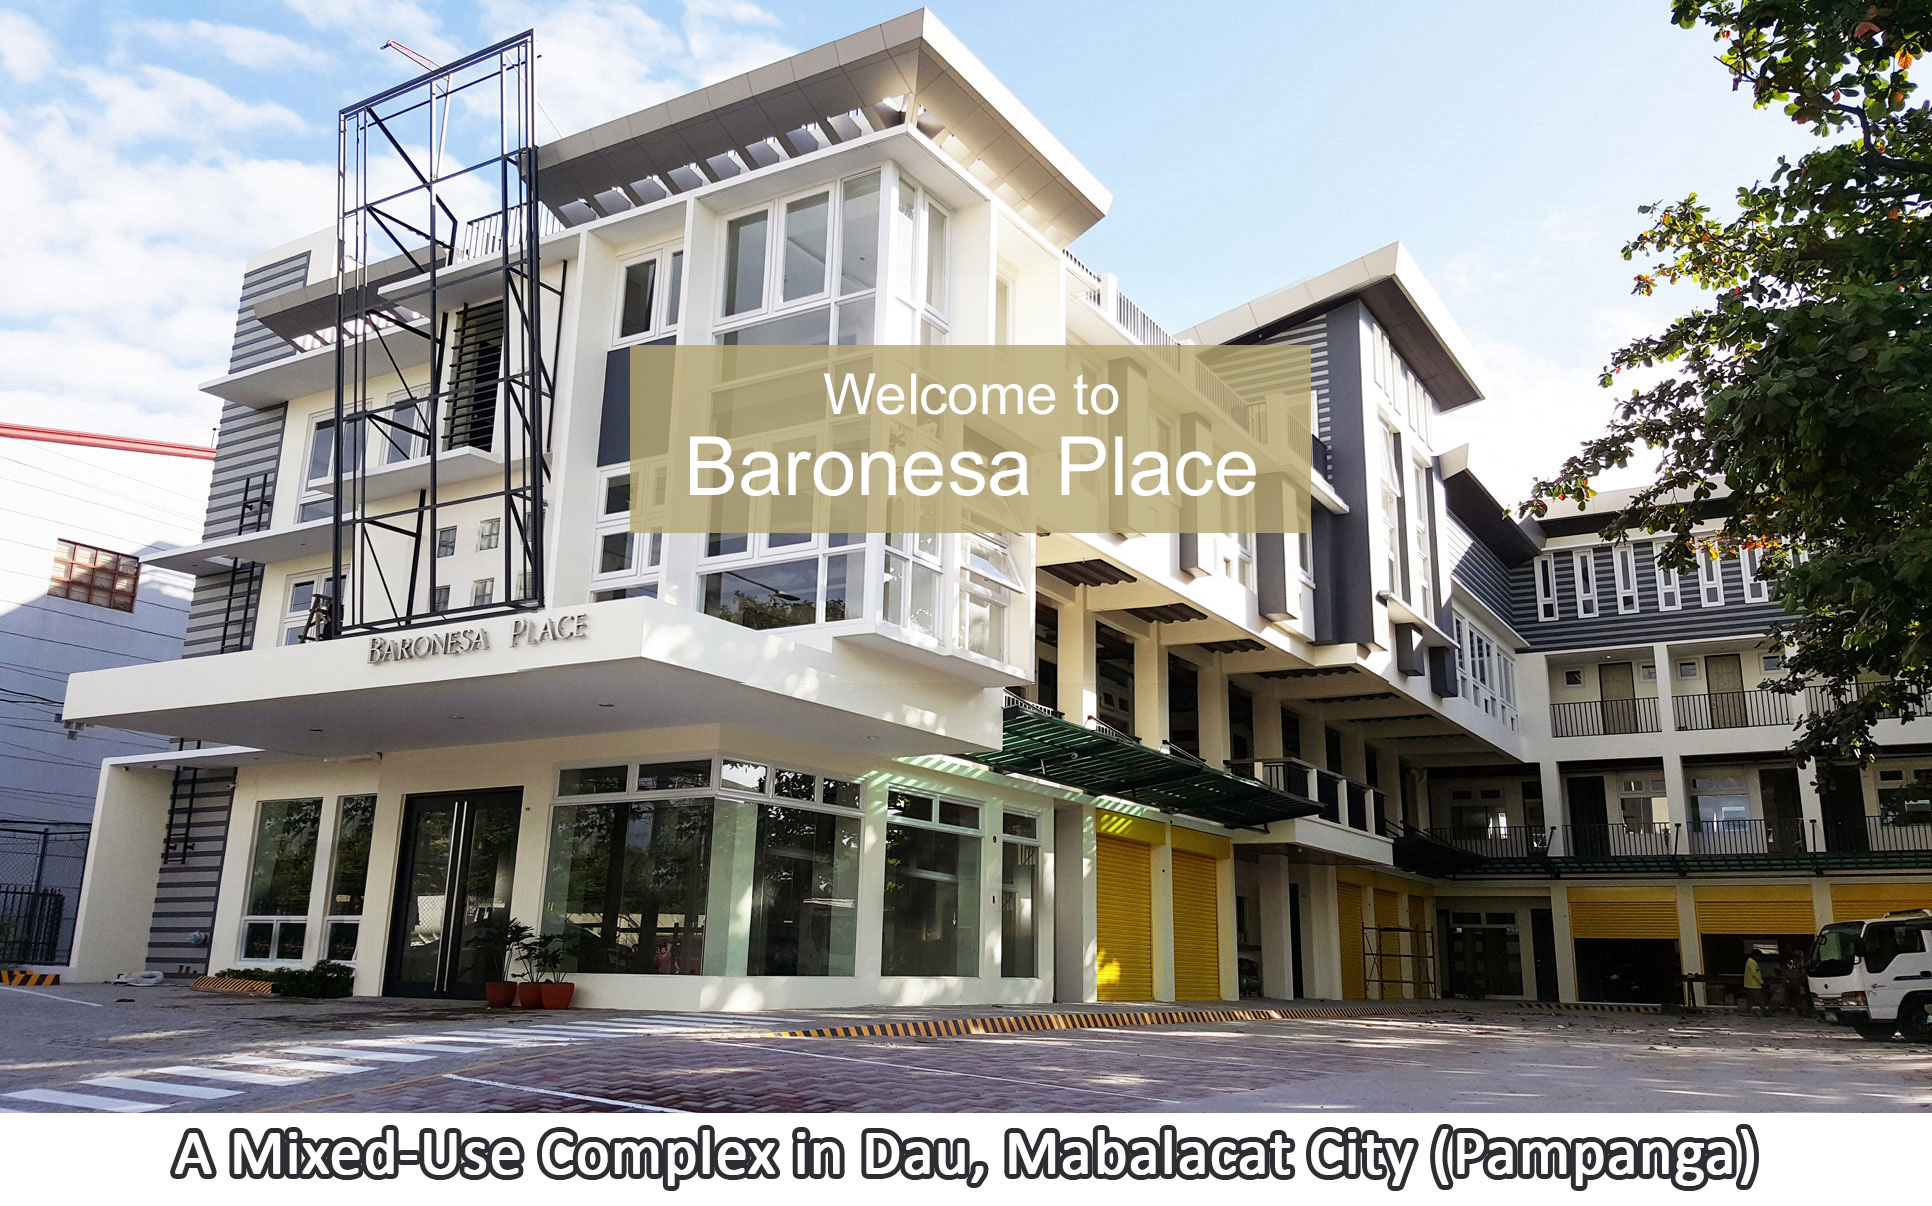 Baronesa Place frontview